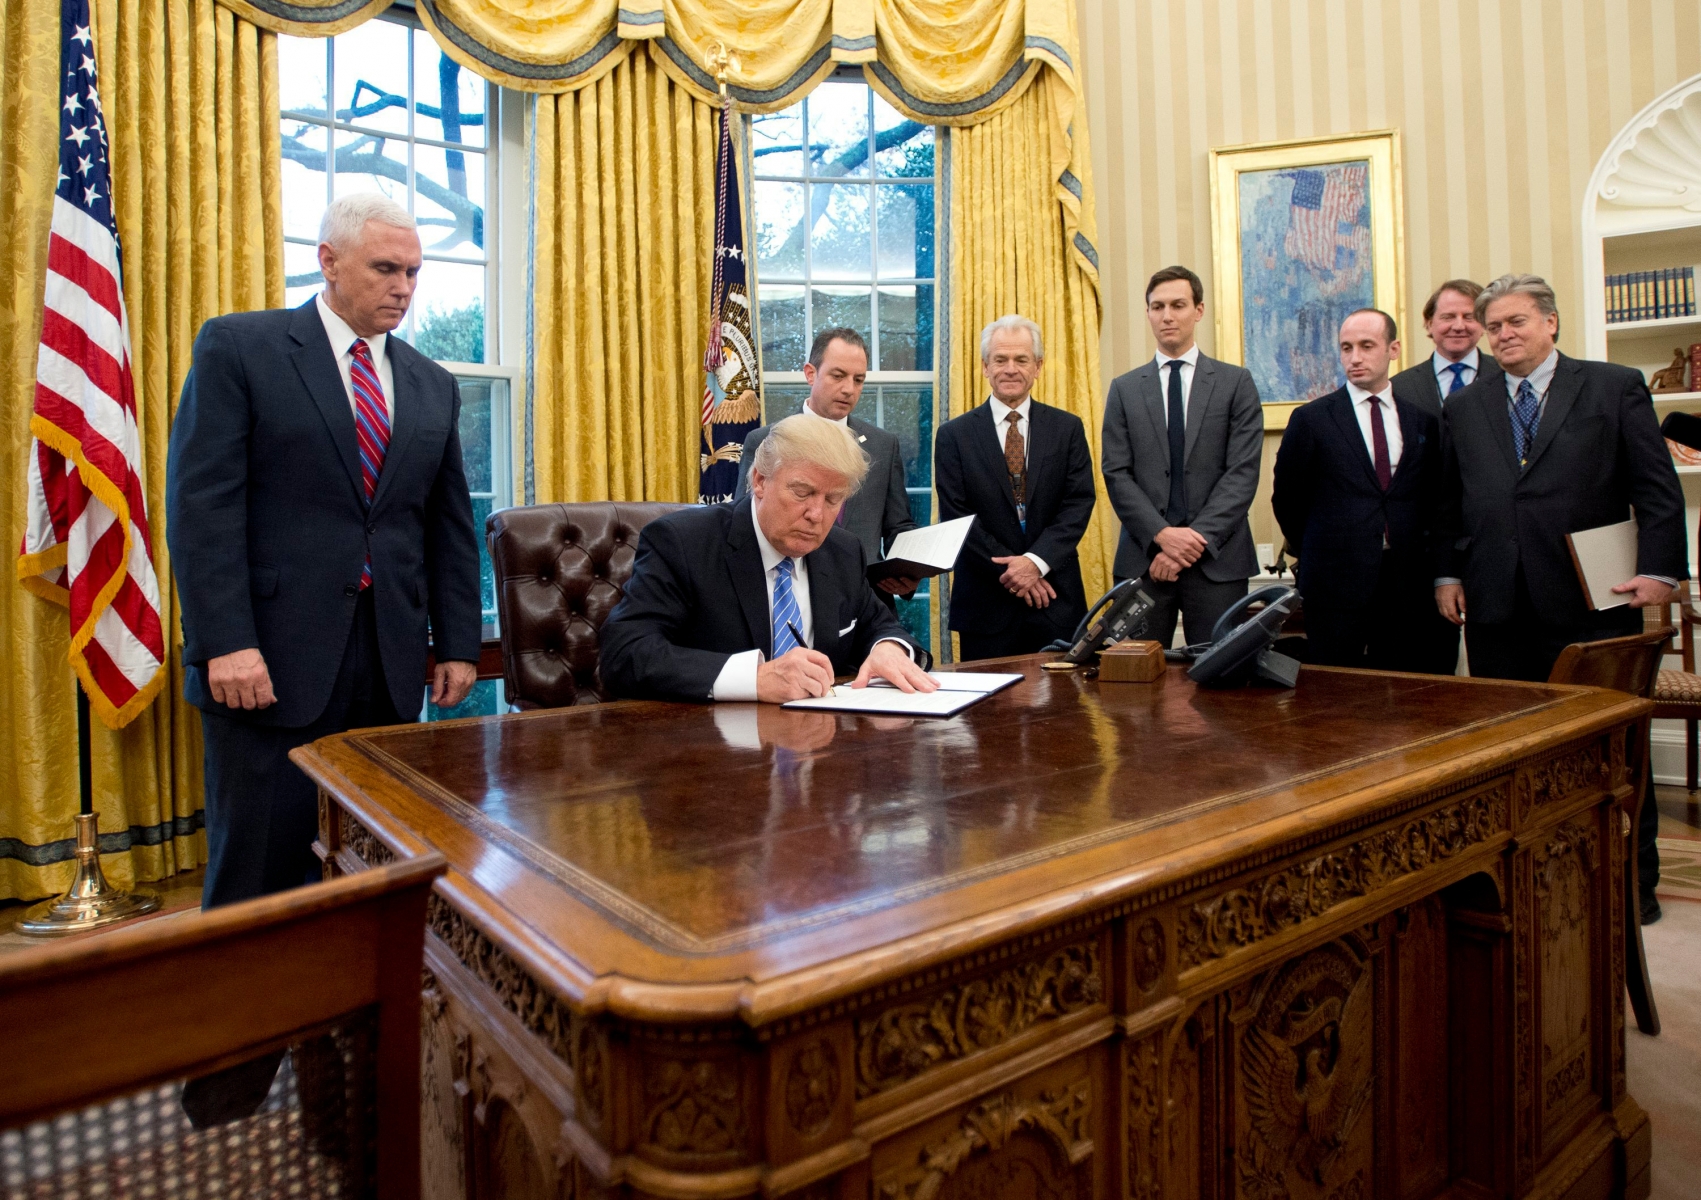 epa05744781 US President Donald J. Trump signs the first of three Executive Orders in the Oval Office of the White House in Washington, DC, USA, 23 January 2017. They concerned the withdrawal of the United States from the Trans-Pacific Partnership (TPP), a US Government hiring freeze for all departments but the military, and "Mexico City" which bans federal funding of abortions overseas. Standing behind the President, from left to right: US Vice President Mike Pence; White House Chief of Staff Reince Preibus; Peter Navarro, Director of the National Trade Council; Jared Kushner, Senior Advisor to the President; Steven Miller, Senior Advisor to the President; unknown; and Steve Bannon, White House Chief Strategist.  EPA/Ron Sachs / POOL USA TRUMP